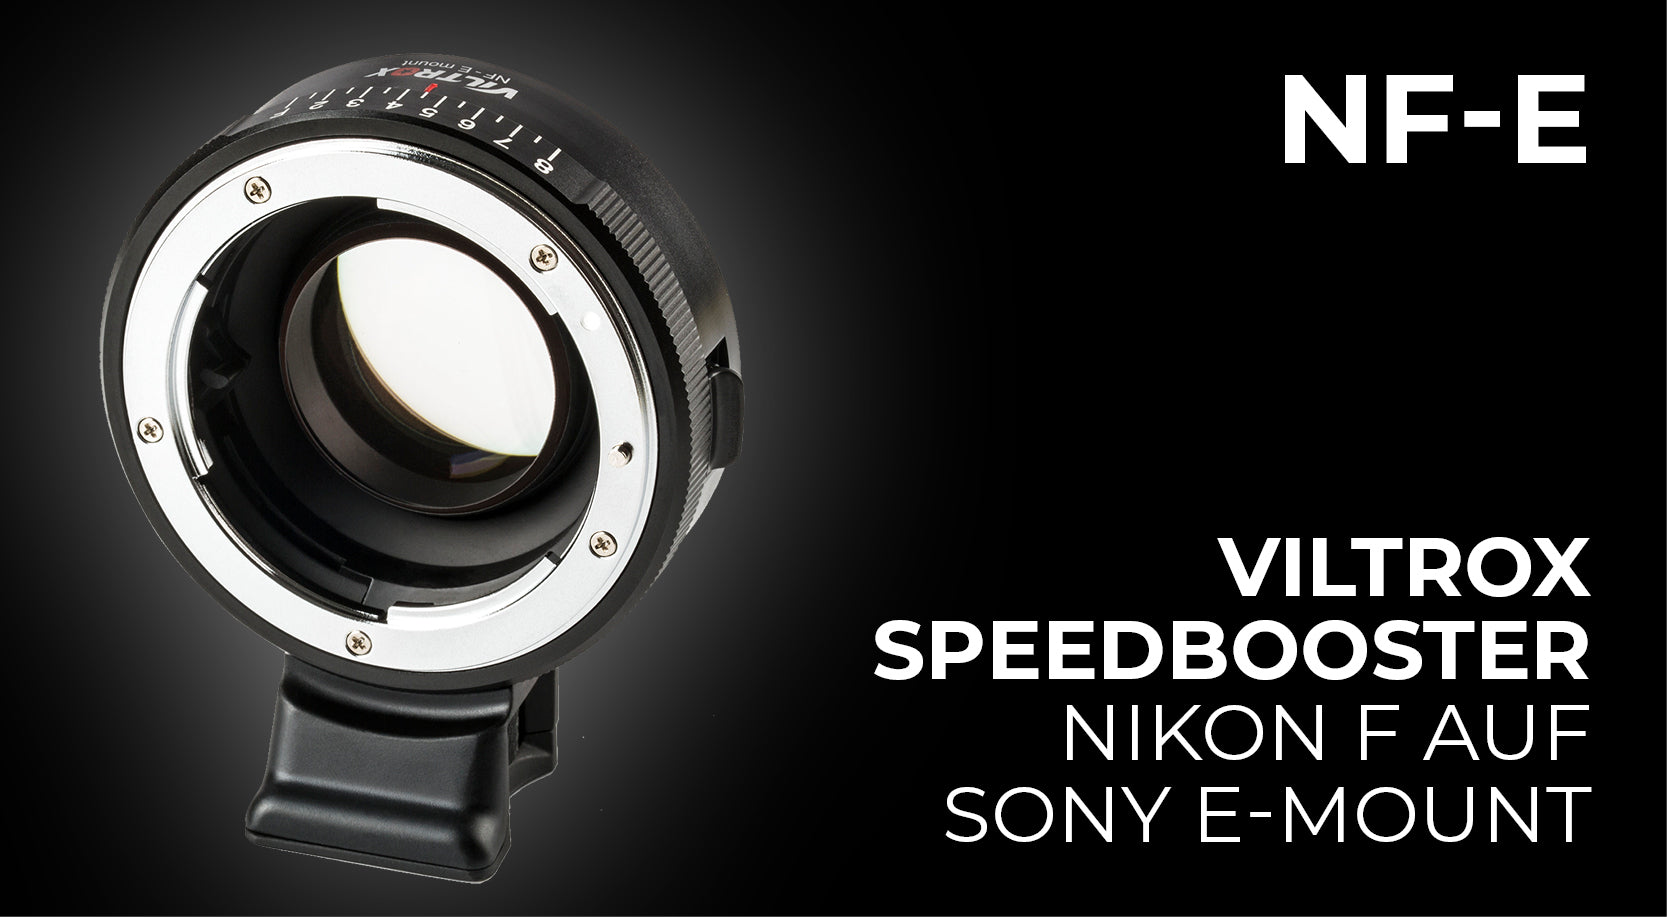 Viltrox NF-E speed booster for using Nikon F lenses on Sony E cameras